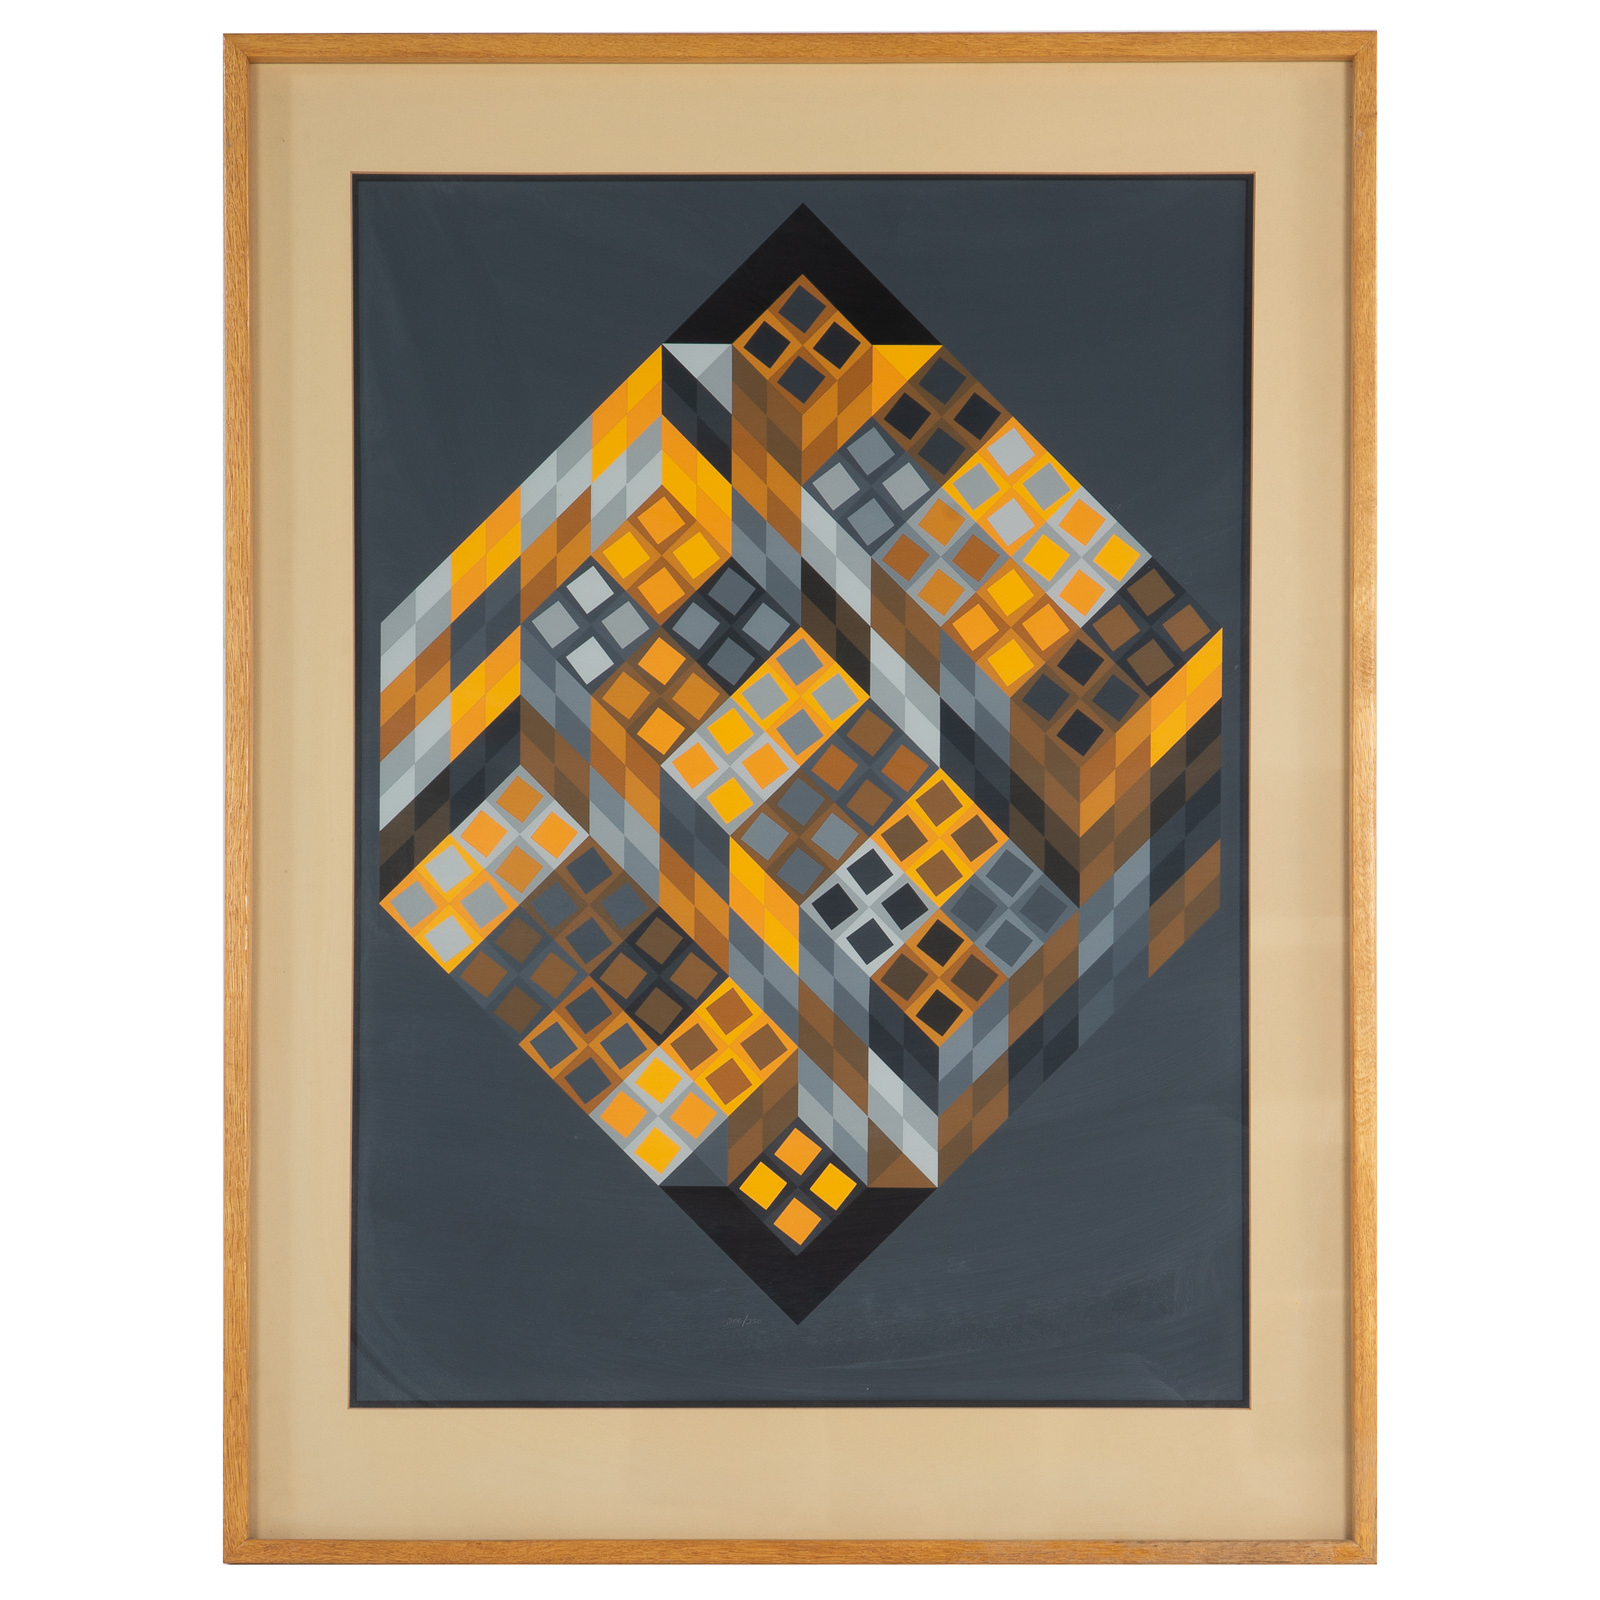 VICTOR VASARELY. UNTITLED, SERIGRAPH